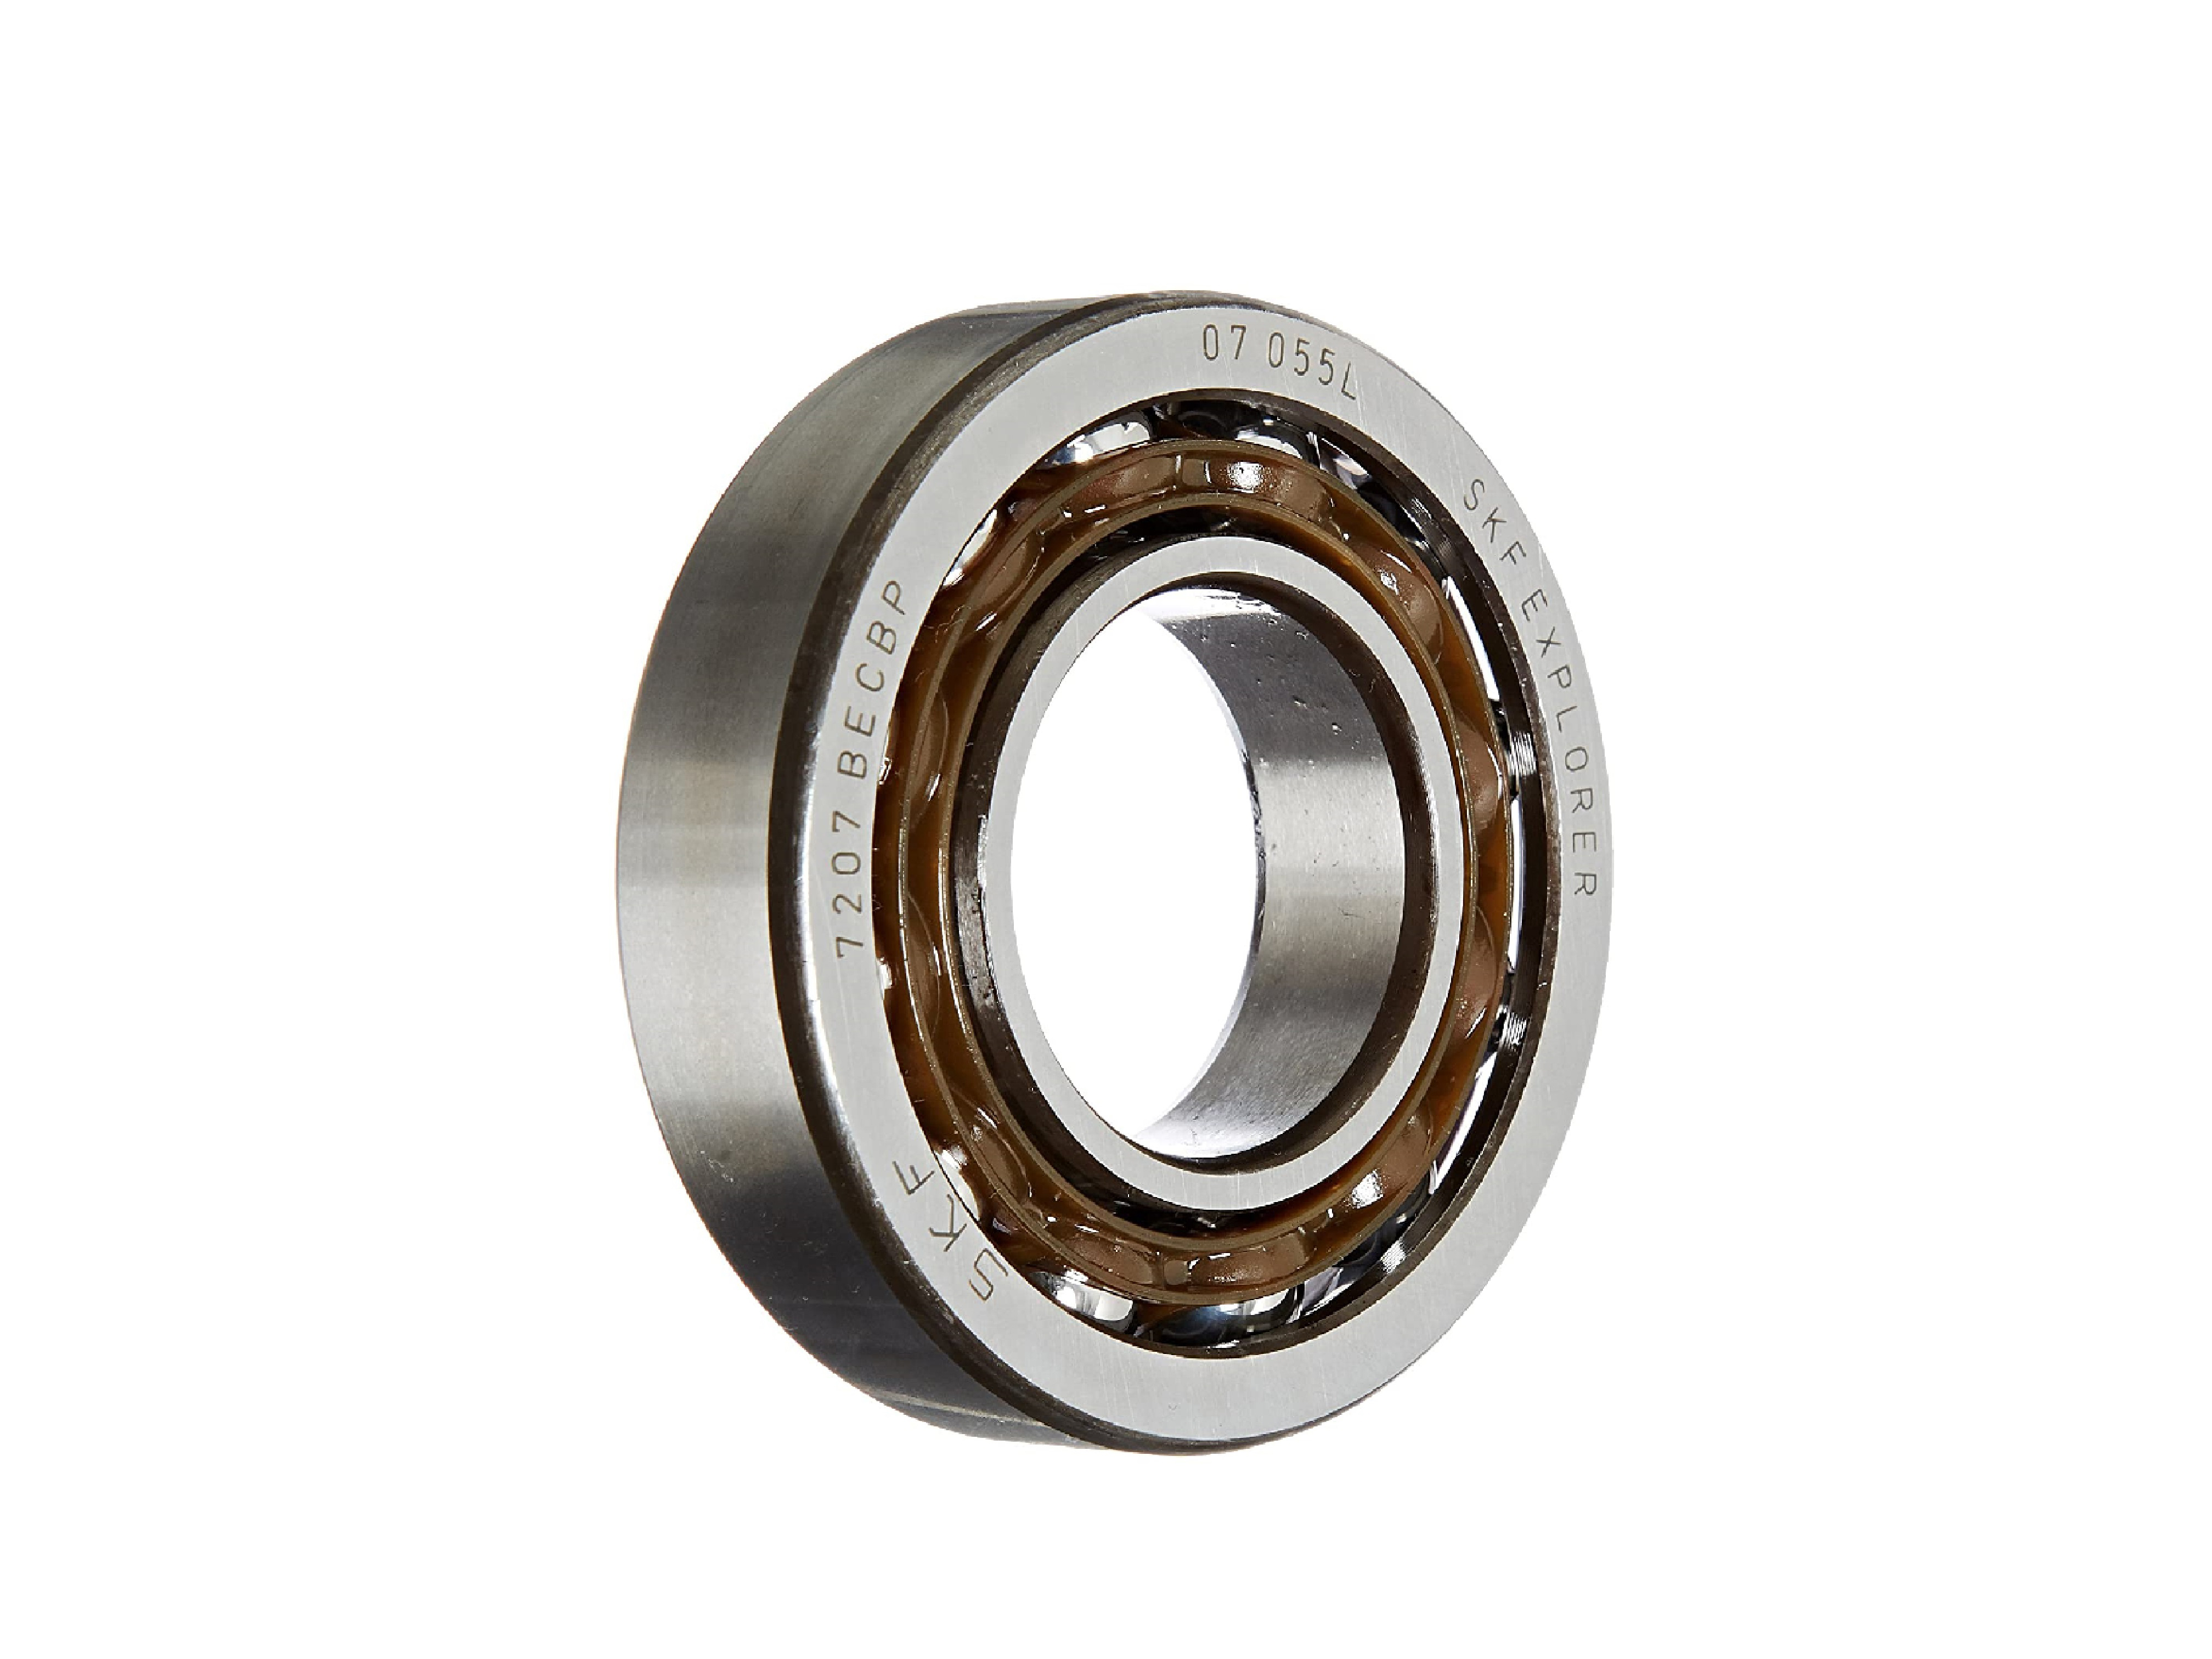 SKF 3205 ATN9 Double Row Ball Bearing, Converging Angle Design, ABEC 1  Precision, Open, Plastic Cage, Normal Clearance, 25mm Bore, 52mm OD, 13/16  Width, 12000 rpm Maximum Rotational Speed, 3218.0 pounds Static